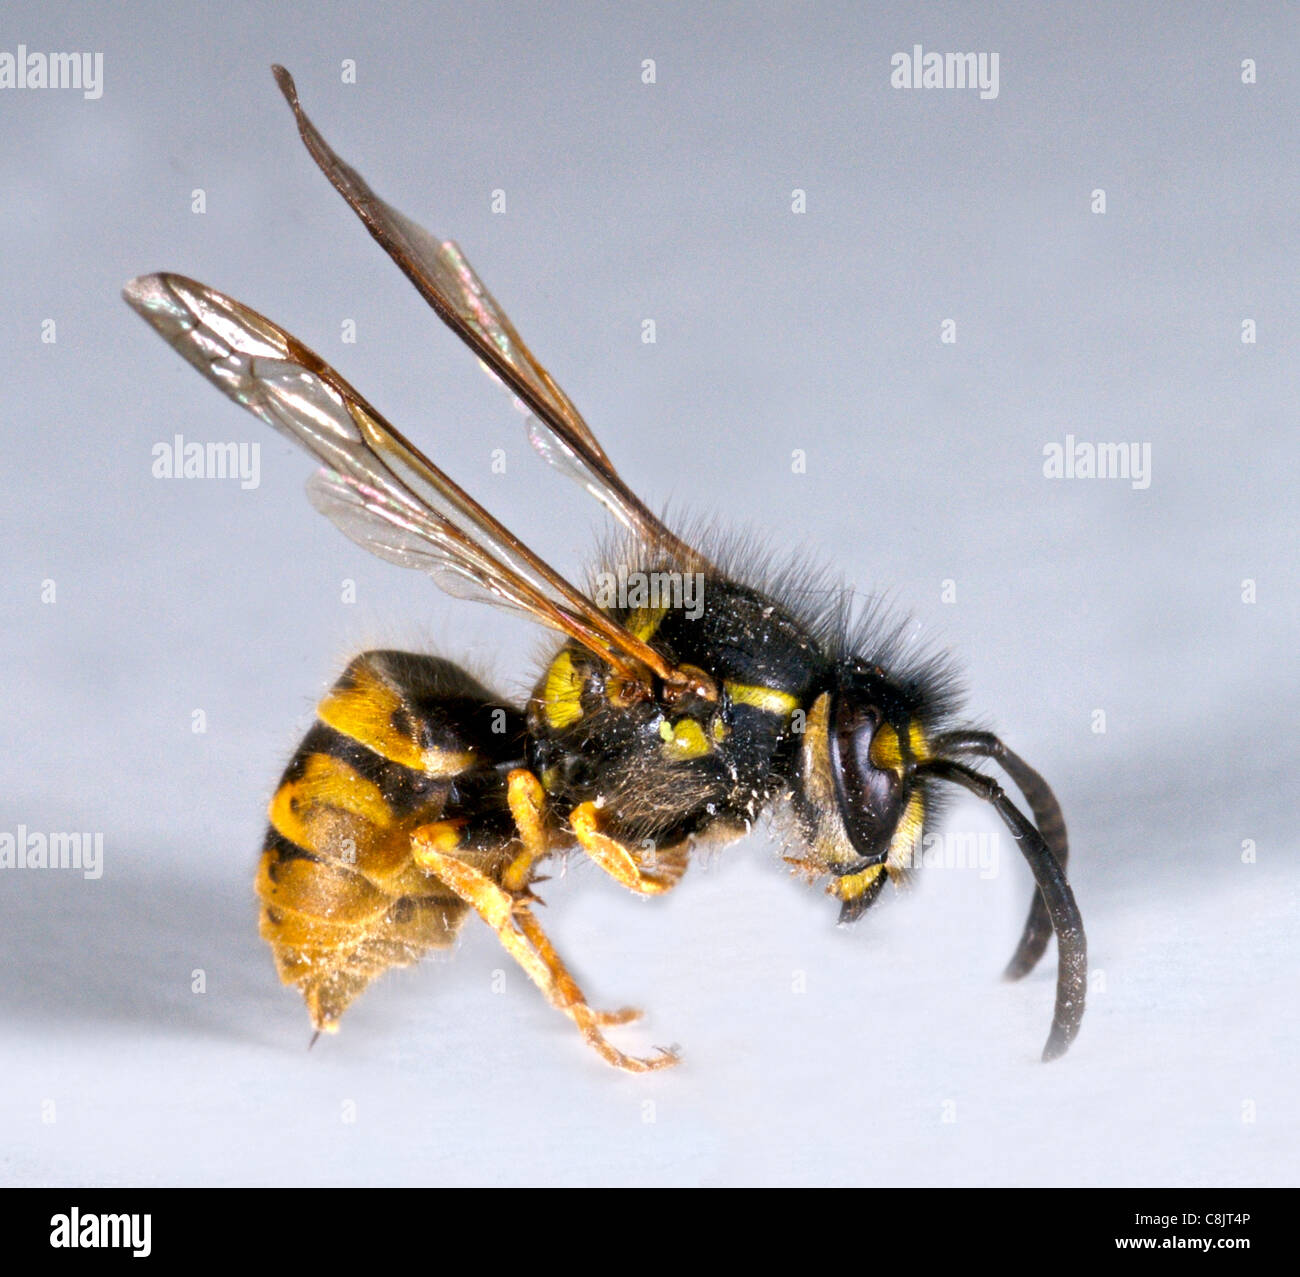 Common Wasp (Vespula vulgaris) The viscious sting of the common wasp makes it a garden pest of note. The black and yellow colouring gives a ready warning of the sting which has caused deaths through allergic reactions. Stock Photo